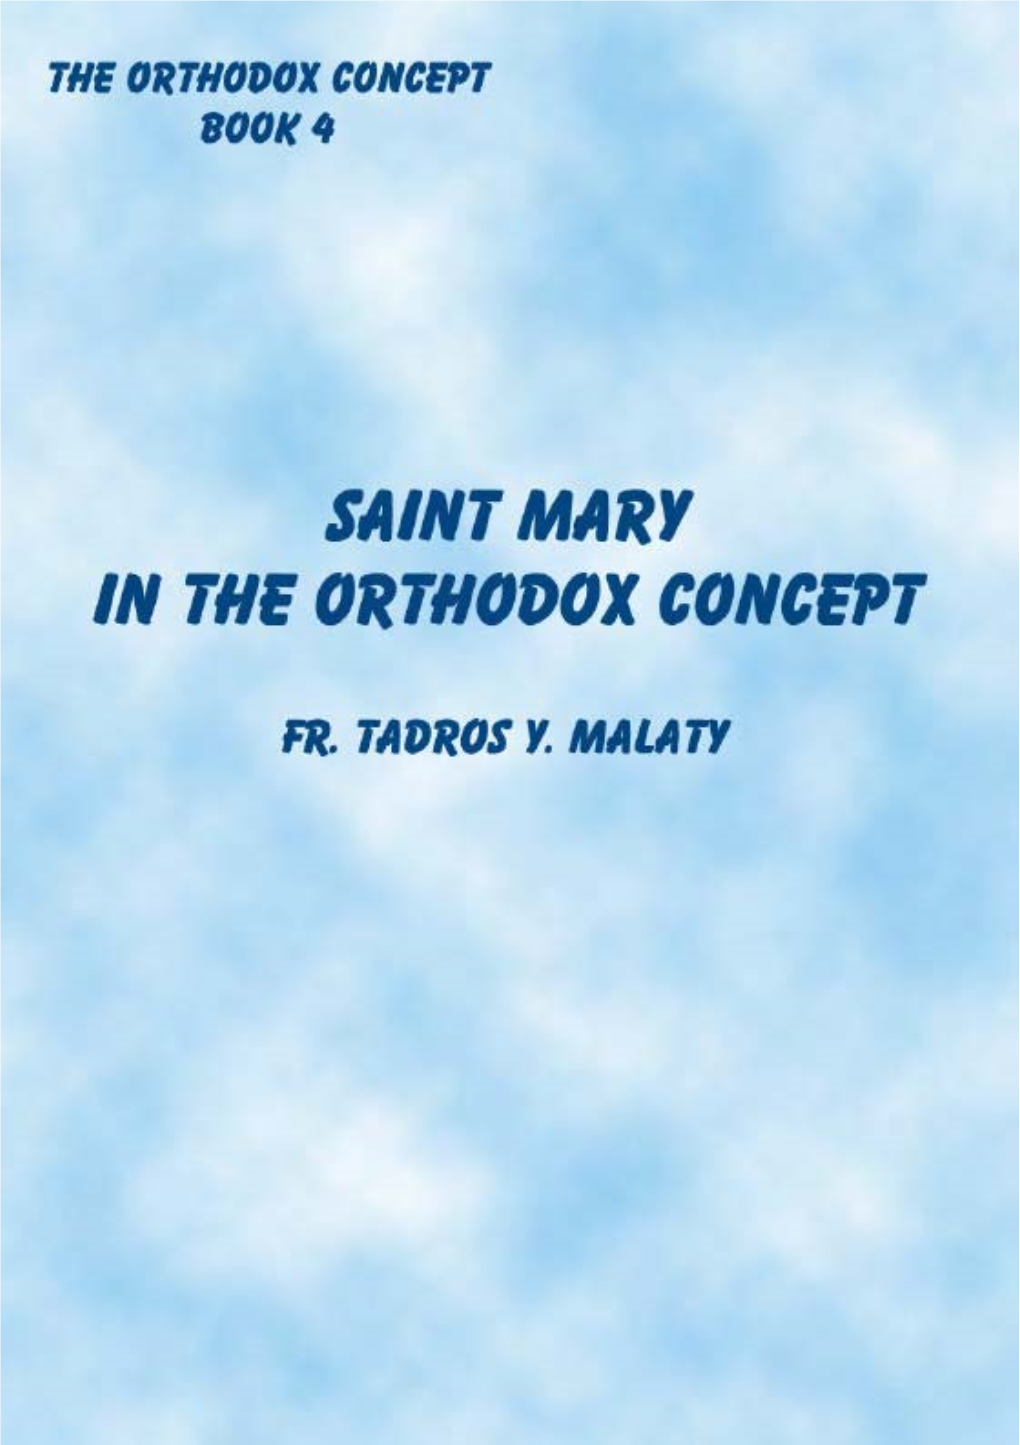 St Mary in the Orthodox Concept